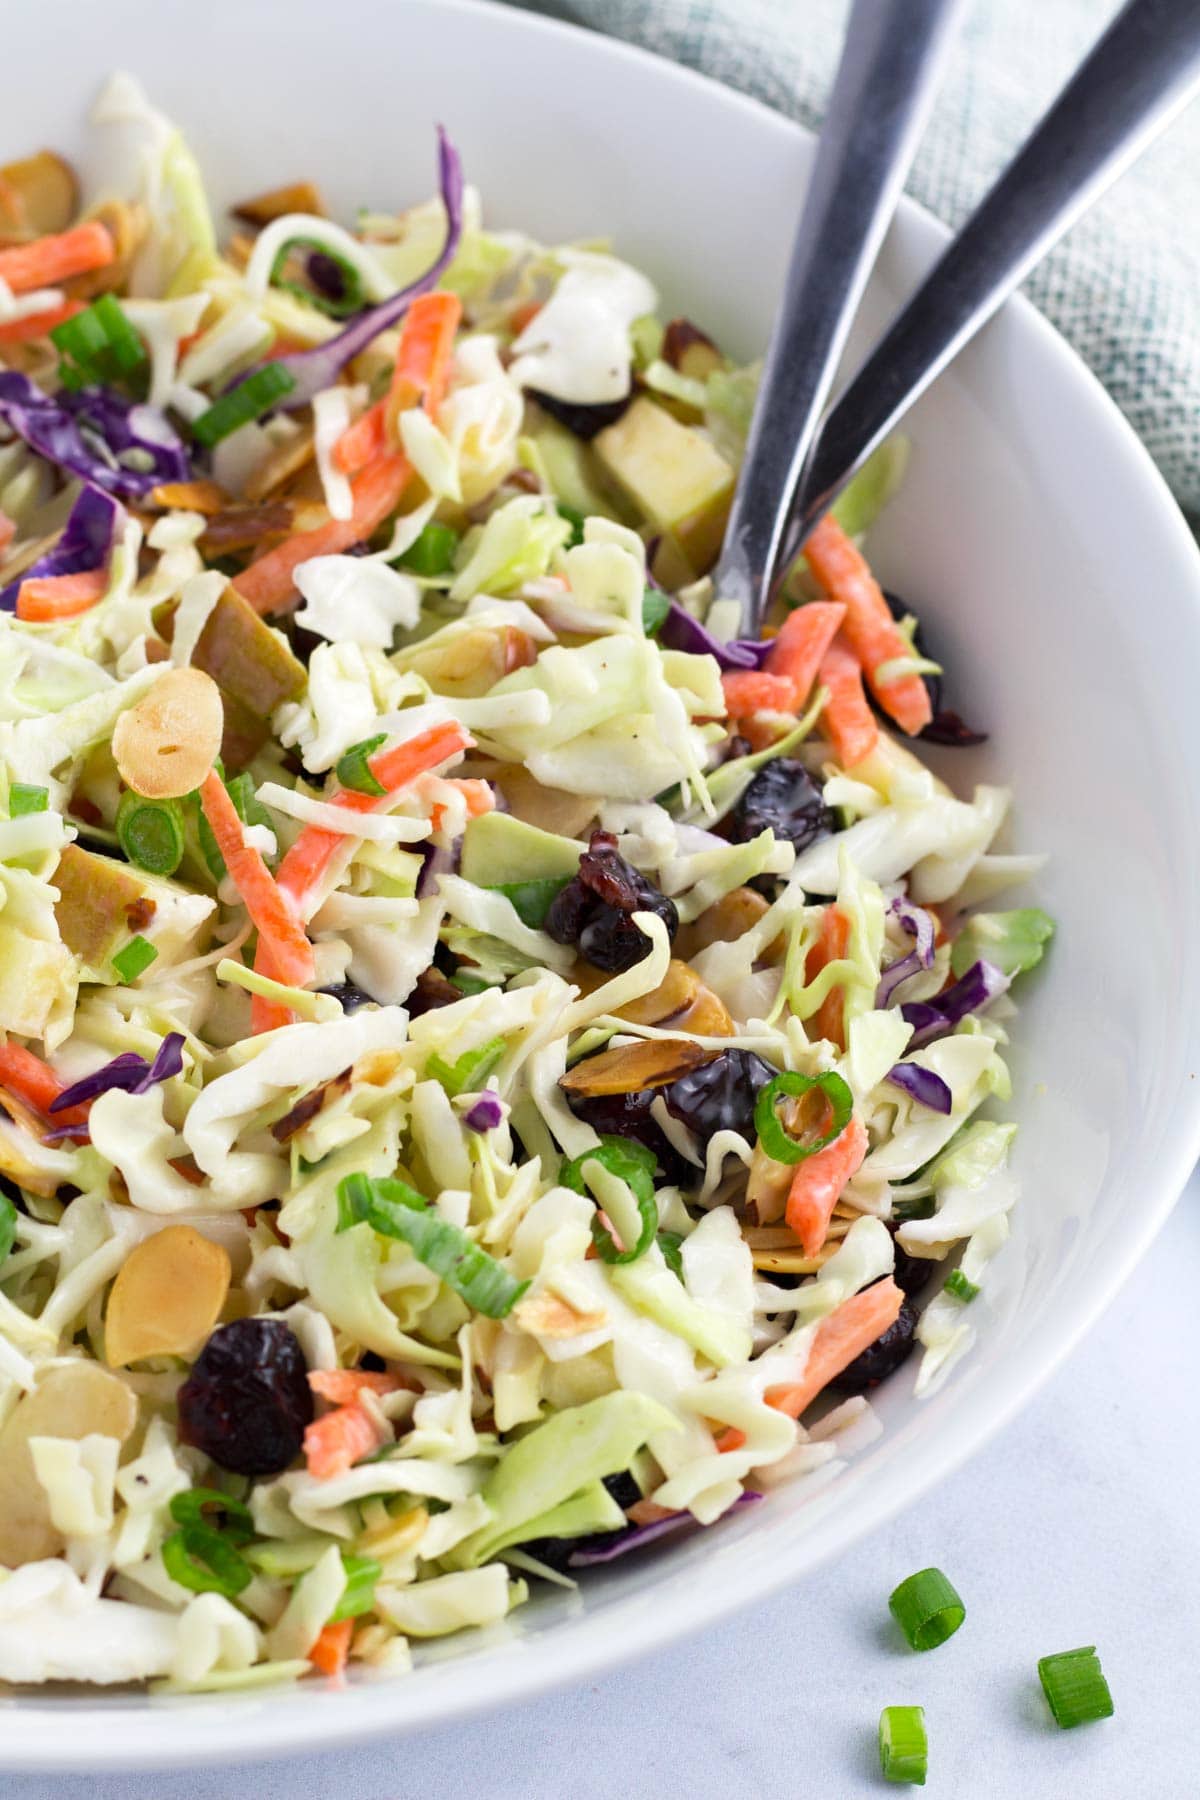 Sweet and tart apples in coleslaw and tossed with a no mayo dressing.